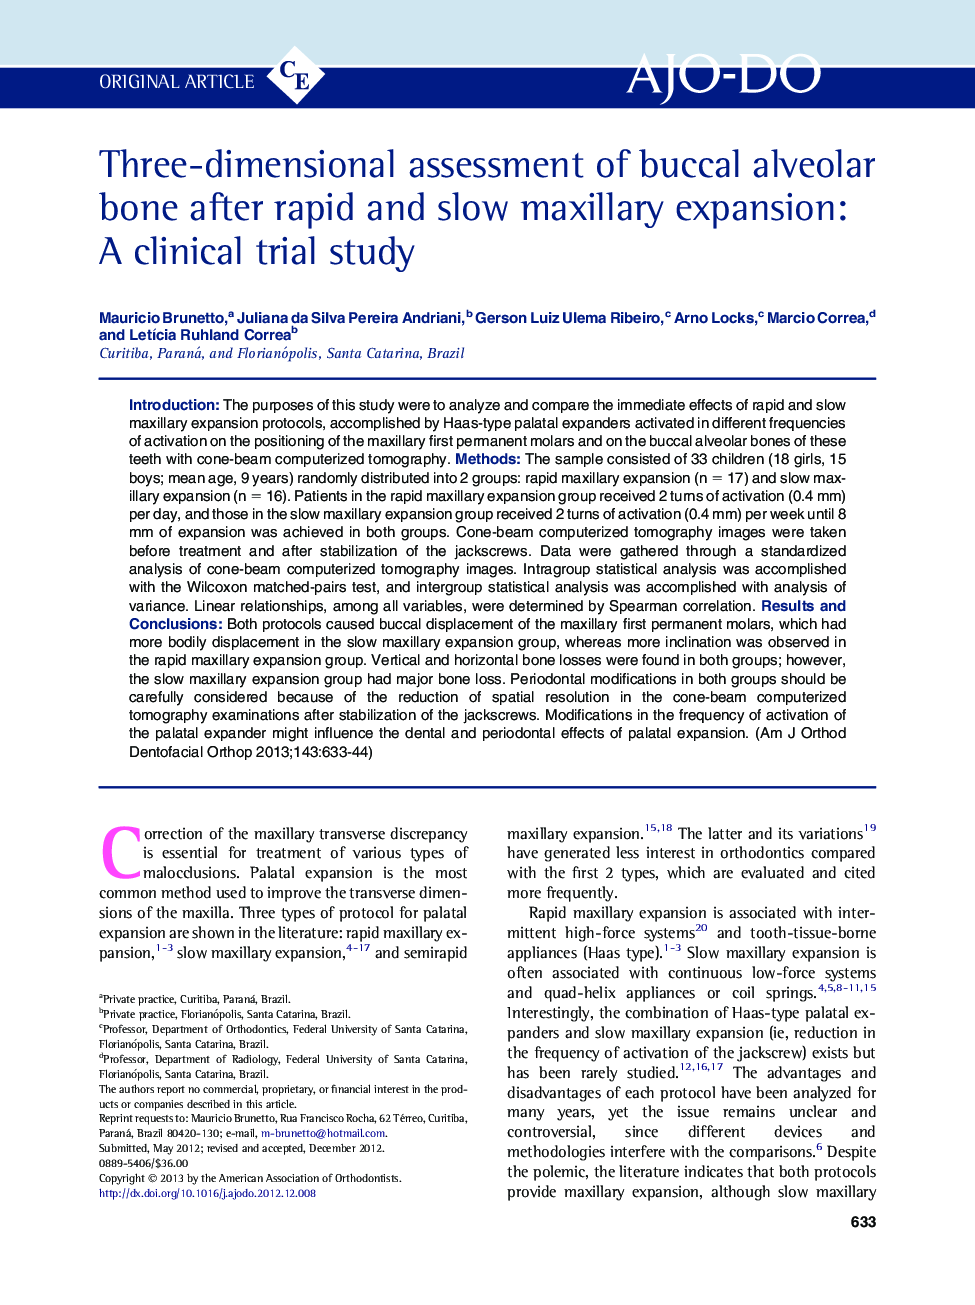 Three-dimensional assessment of buccal alveolar bone after rapid and slow maxillary expansion: A clinical trial study 